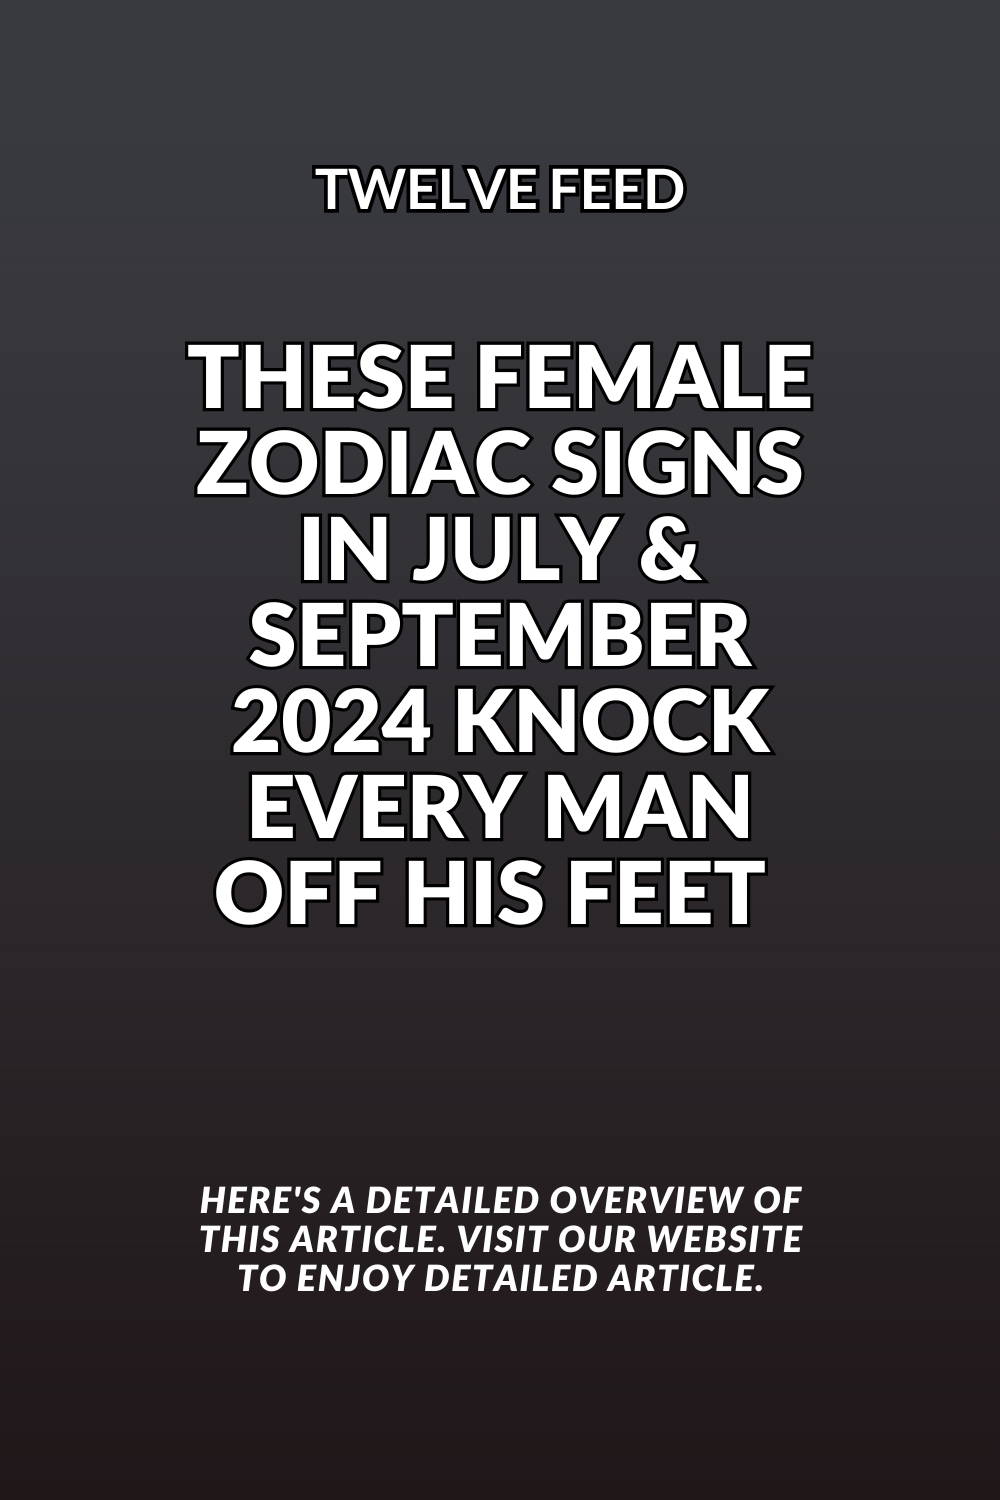 These Female Zodiac Signs In July & September 2024 Knock Every Man Off His Feet